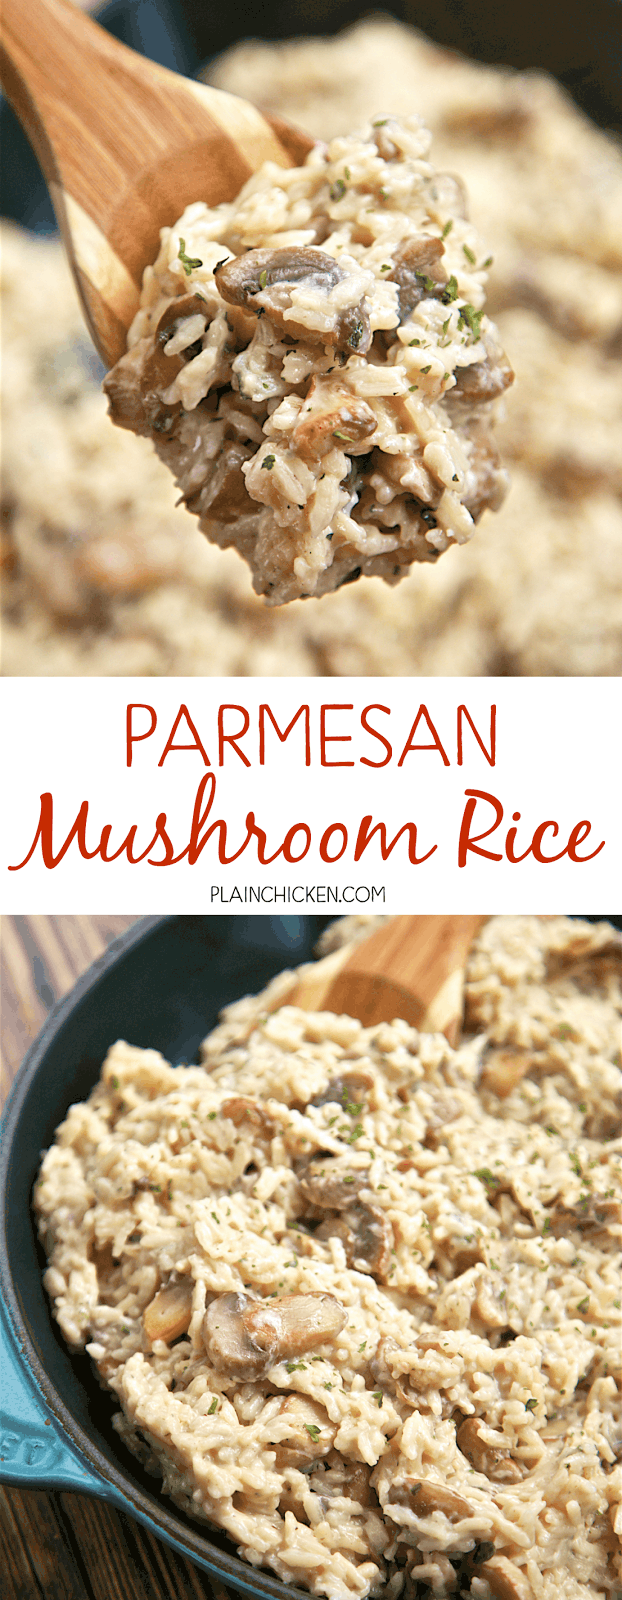 Parmesan Mushroom Rice - ready in 20 minutes! You'll never use the boxed stuff again! Rice, mushrooms garlic, chicken broth, milk, parmesan cheese and parsley. So easy and SOOOO delicious! You can leave out the mushrooms if you don't like them - great either way.